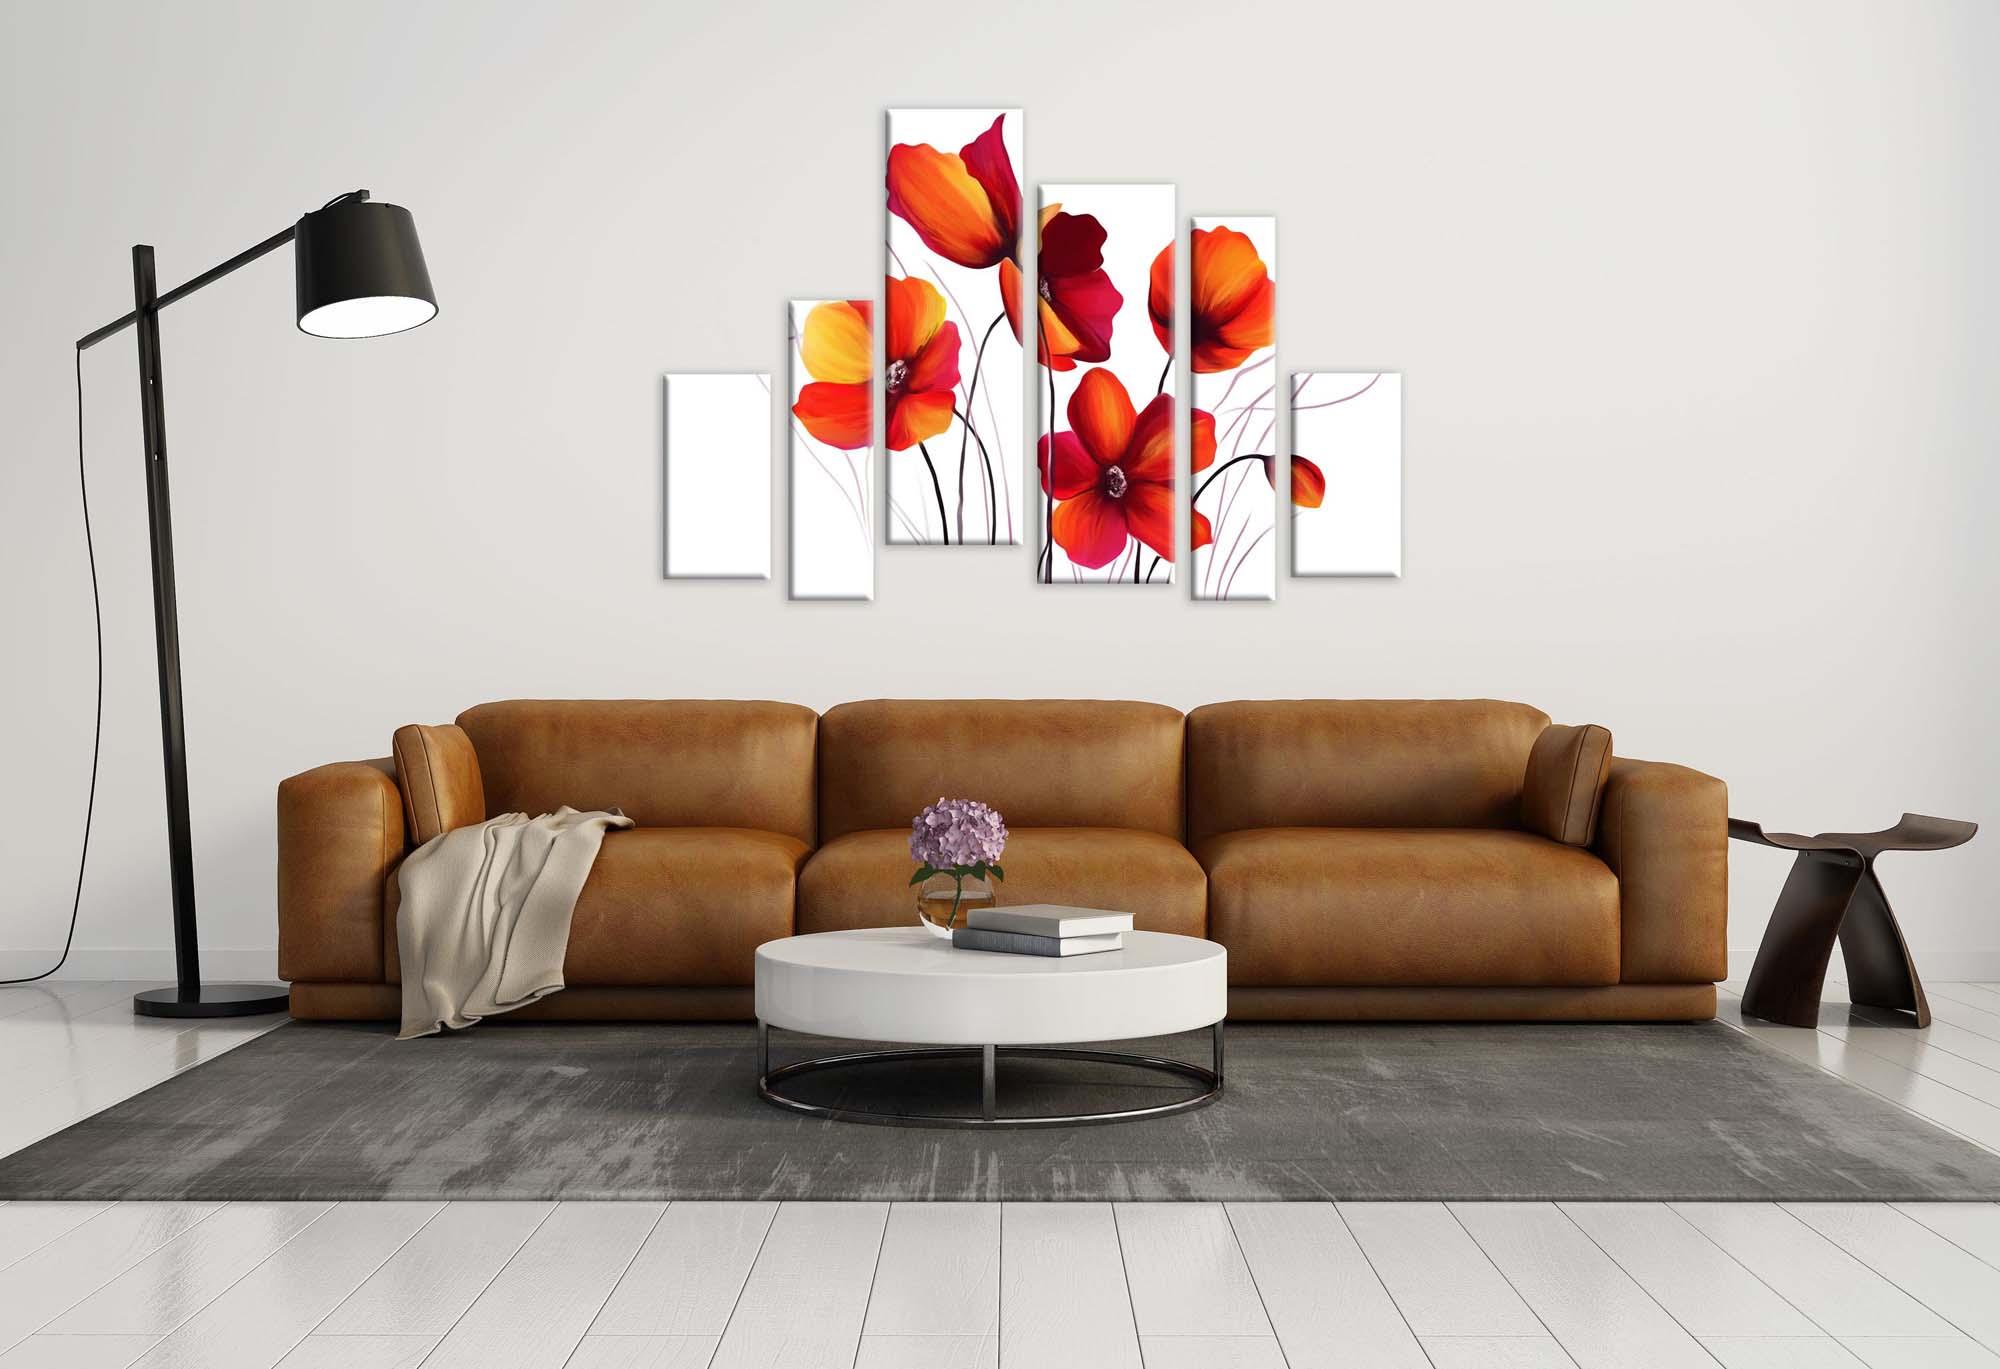 Picture Modular picture - poppies on a white background 5